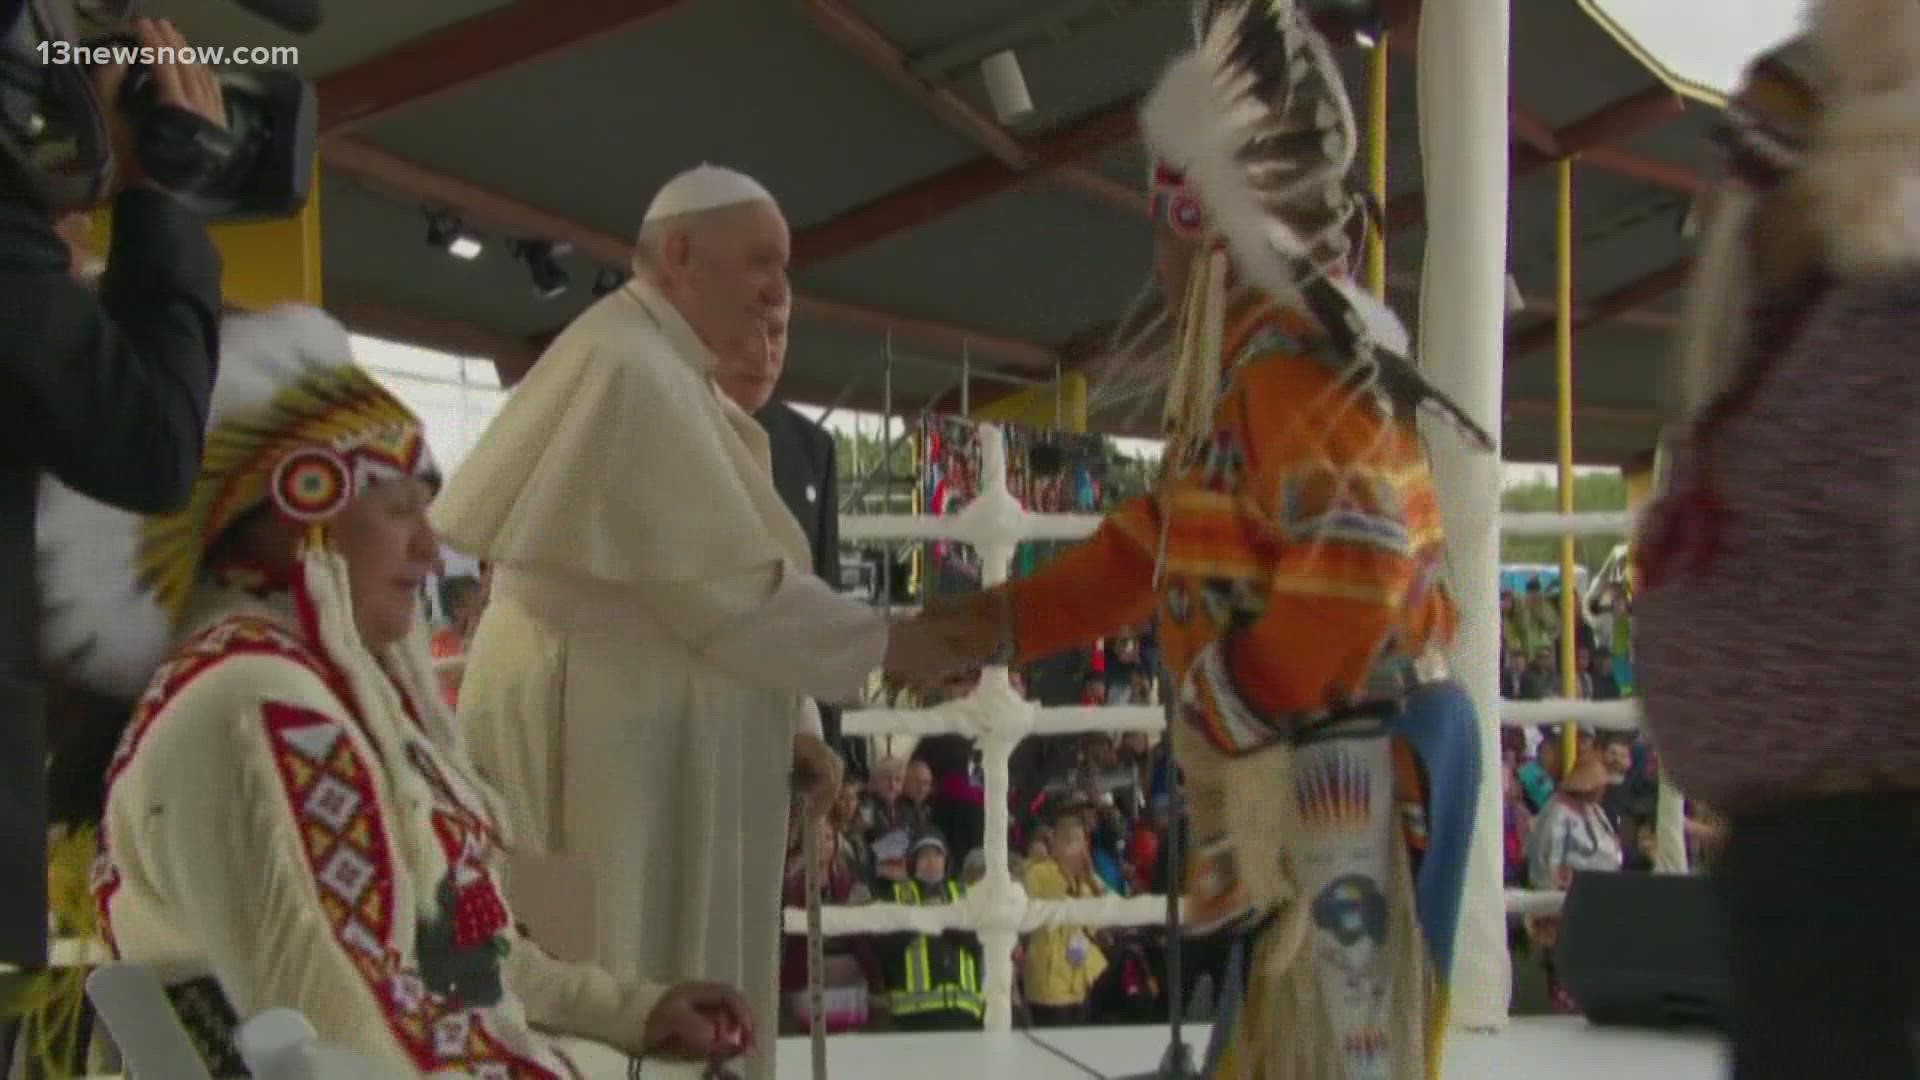 The Pope apologized to people at indigenous residential schools for forced assimilation of indigenous people.